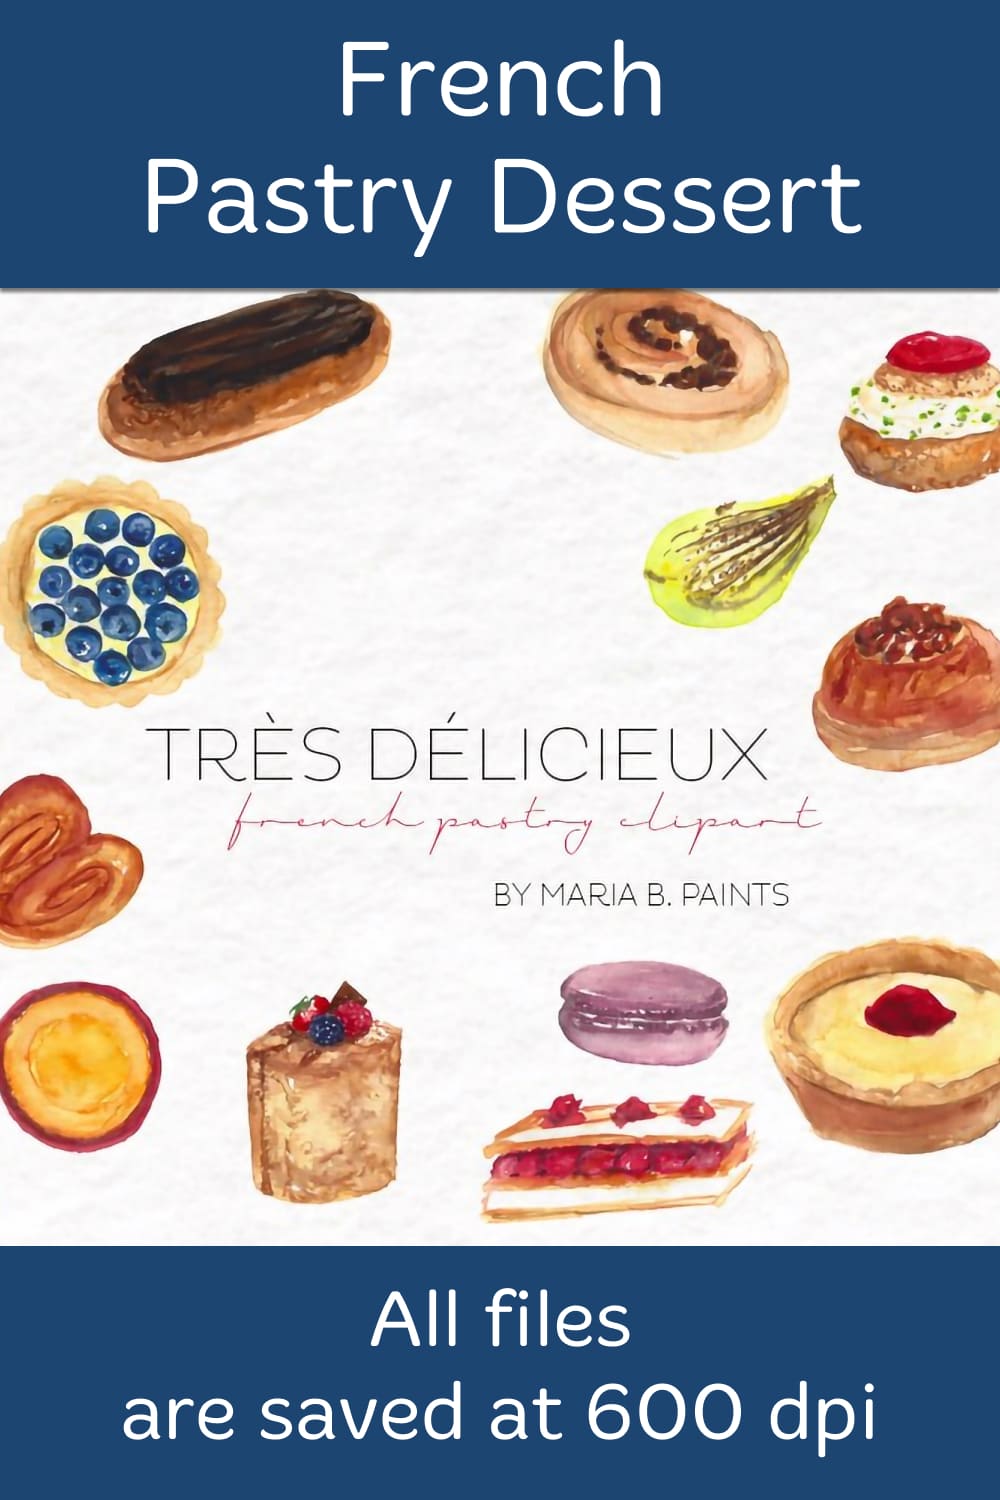 French Pastry Dessert Watercolor Clipart - Pinterest.